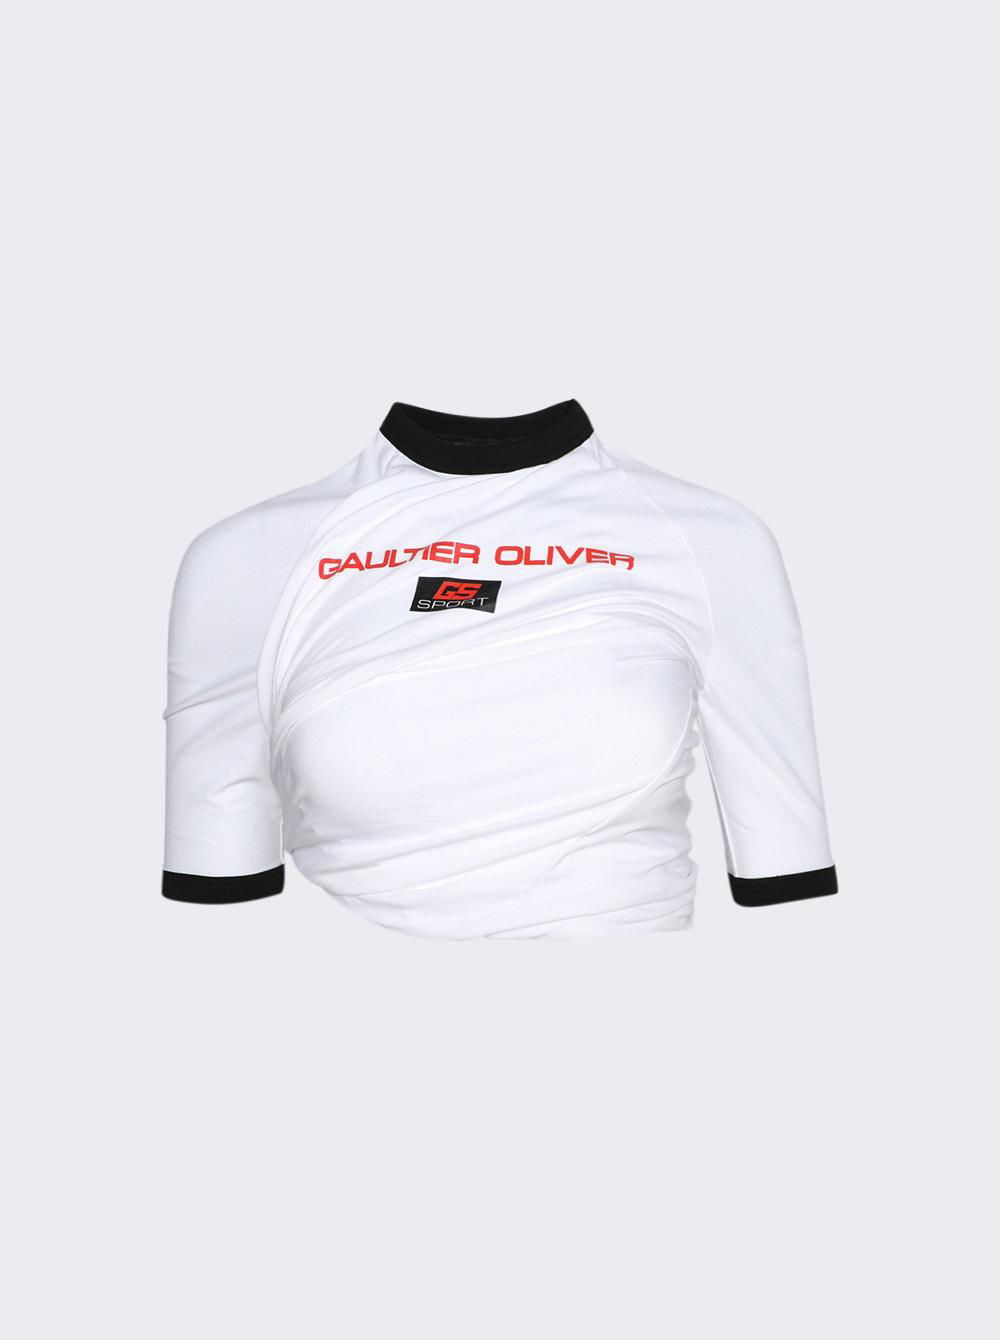 X Shayne Oliver Jersey Twisted Ringer Tee White  | The Webster by JEAN PAUL GAULTIER